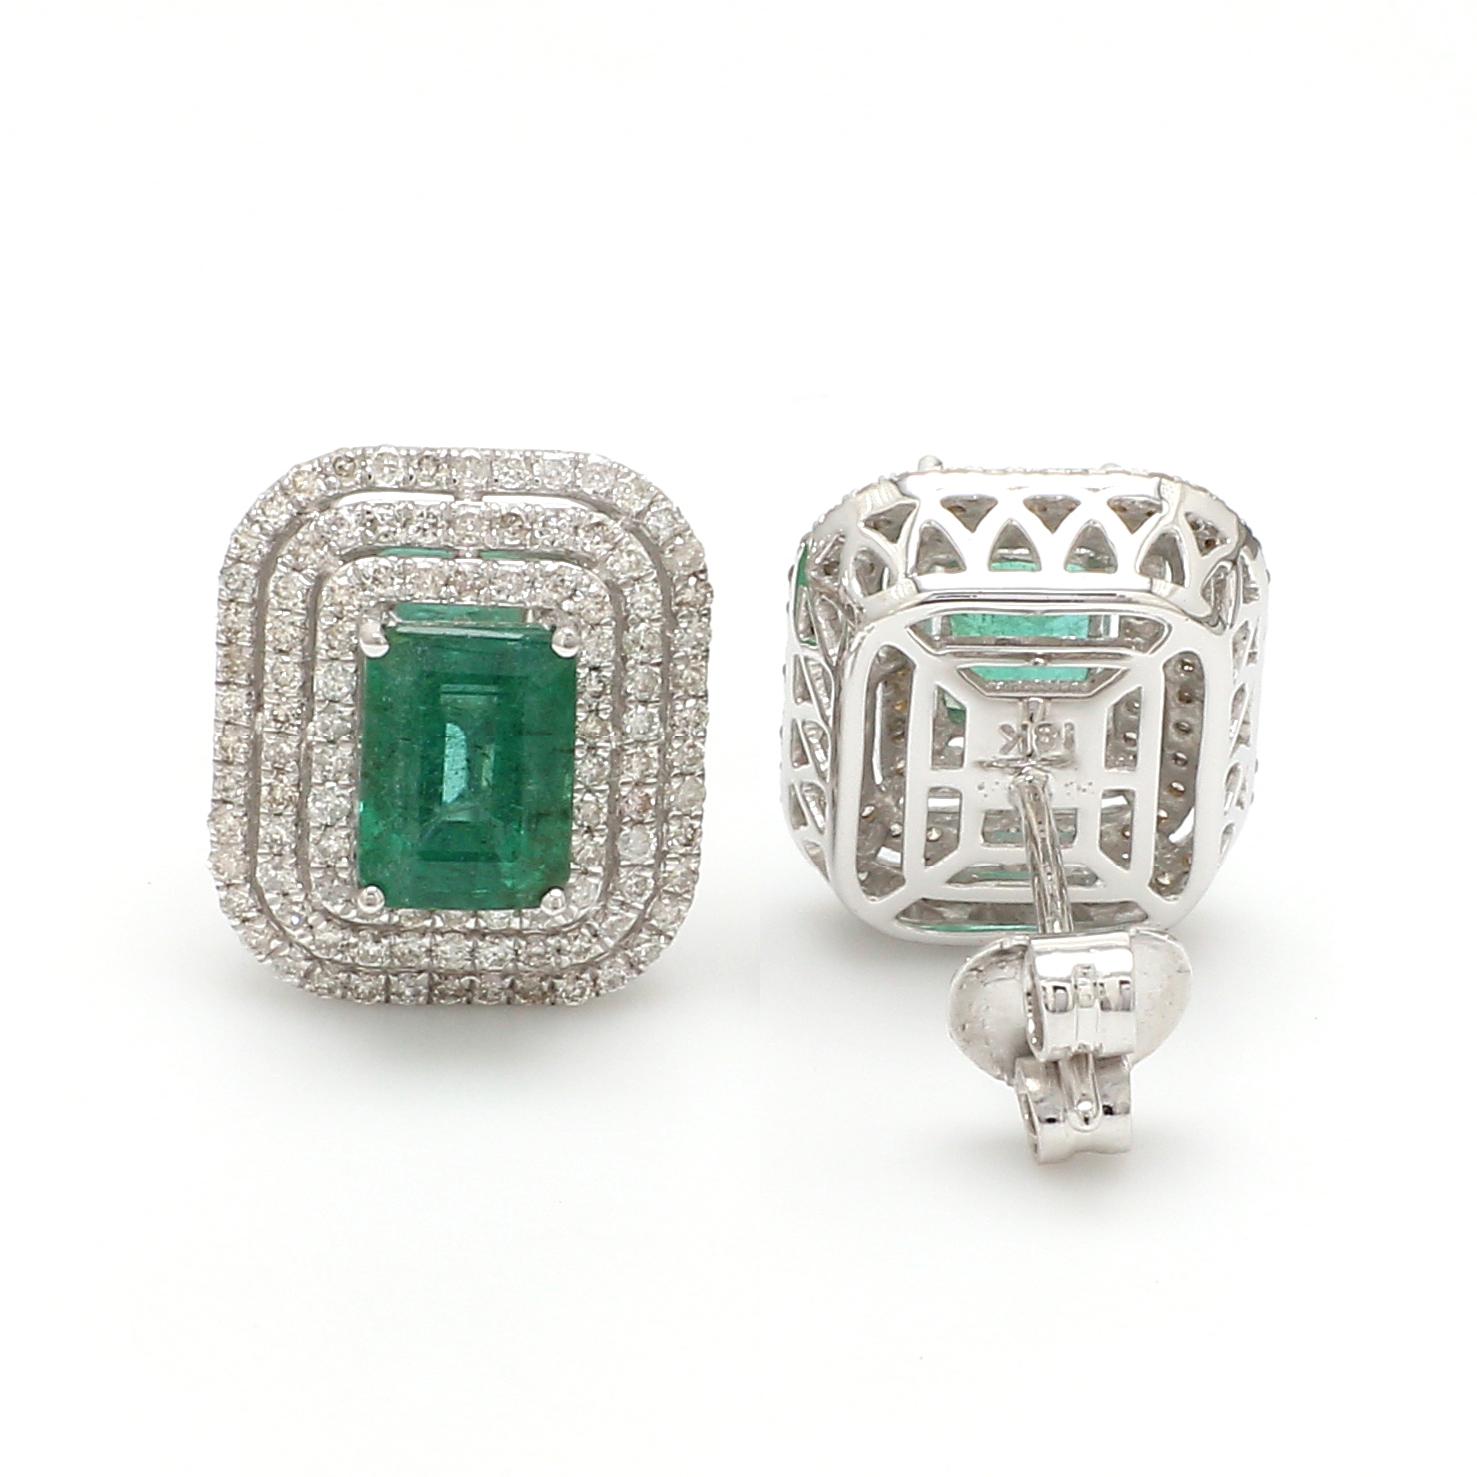 Item Code :- CN-31583
Gross Wt. :- 5.51 gm
18k White Gold Wt. :- 4.89 gm
Diamond Wt. :- 0.90 Ct. ( AVERAGE DIAMOND CLARITY SI1-SI2 & COLOR H-I )
Emerald Wt. :- 2.18 Ct.
Earrings Size :- 14 x 12 mm approx.

✦ Sizing
.....................
We can